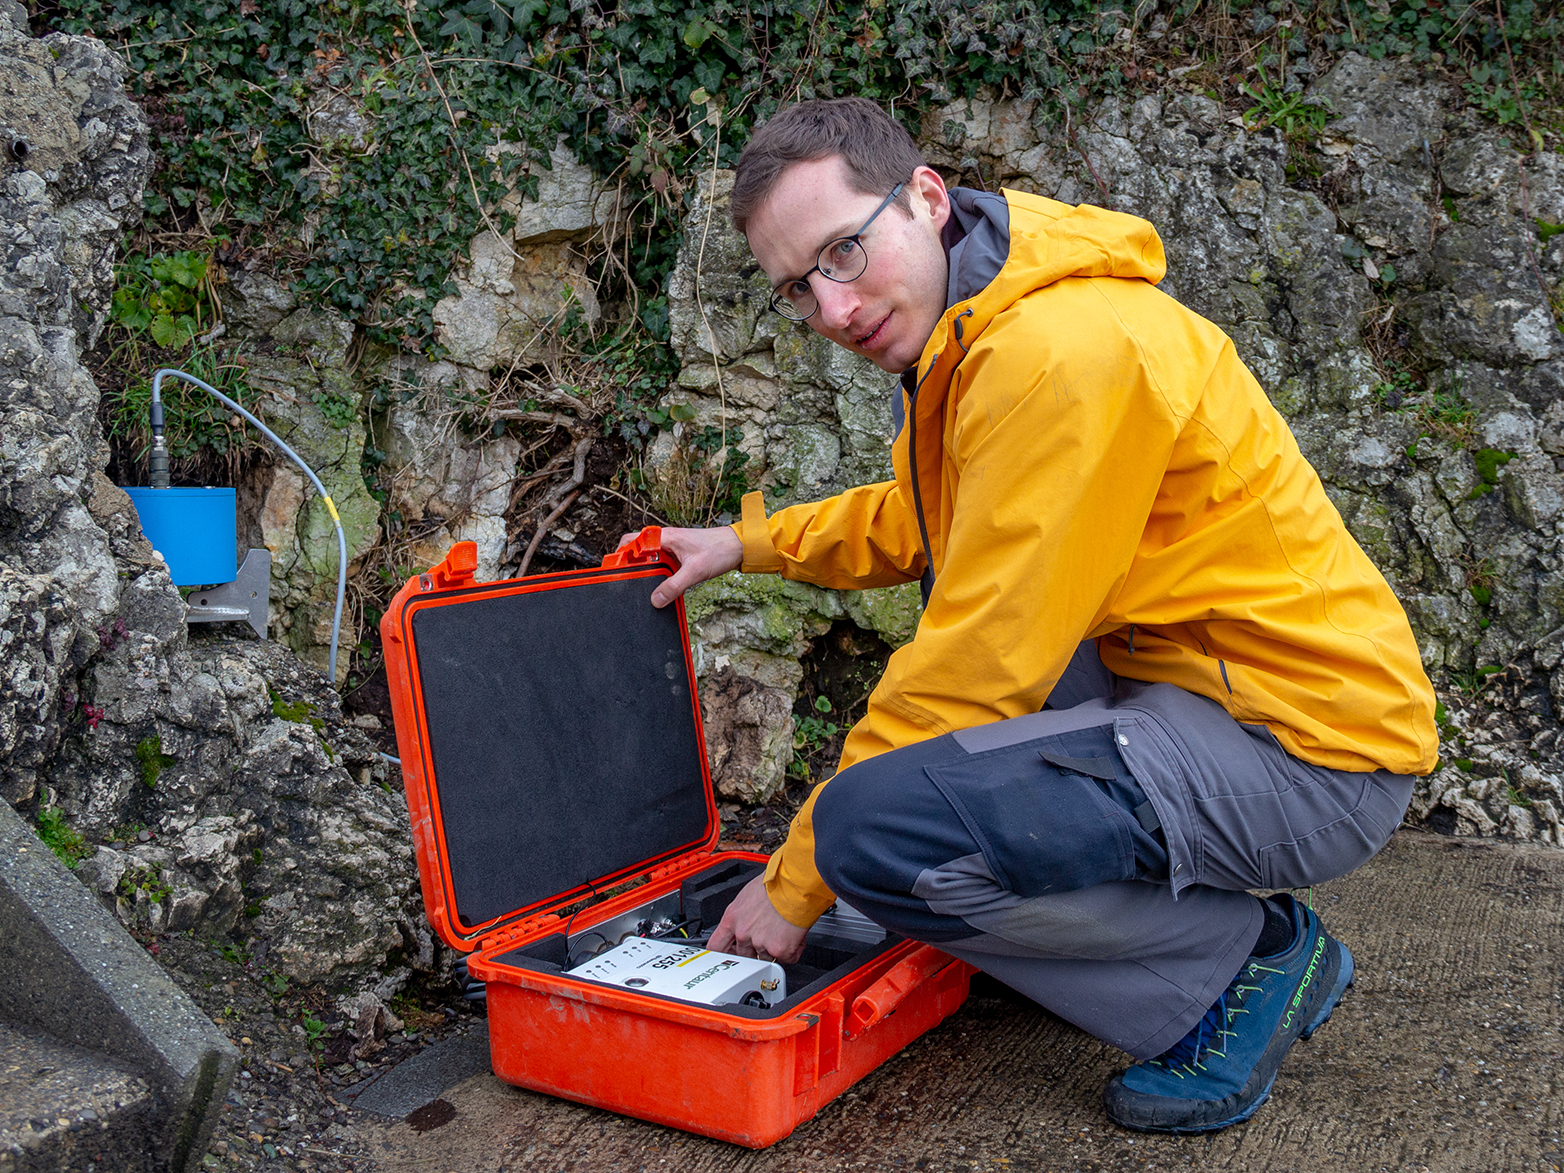 Mauro Häusler puts a mobile measuring station into operation